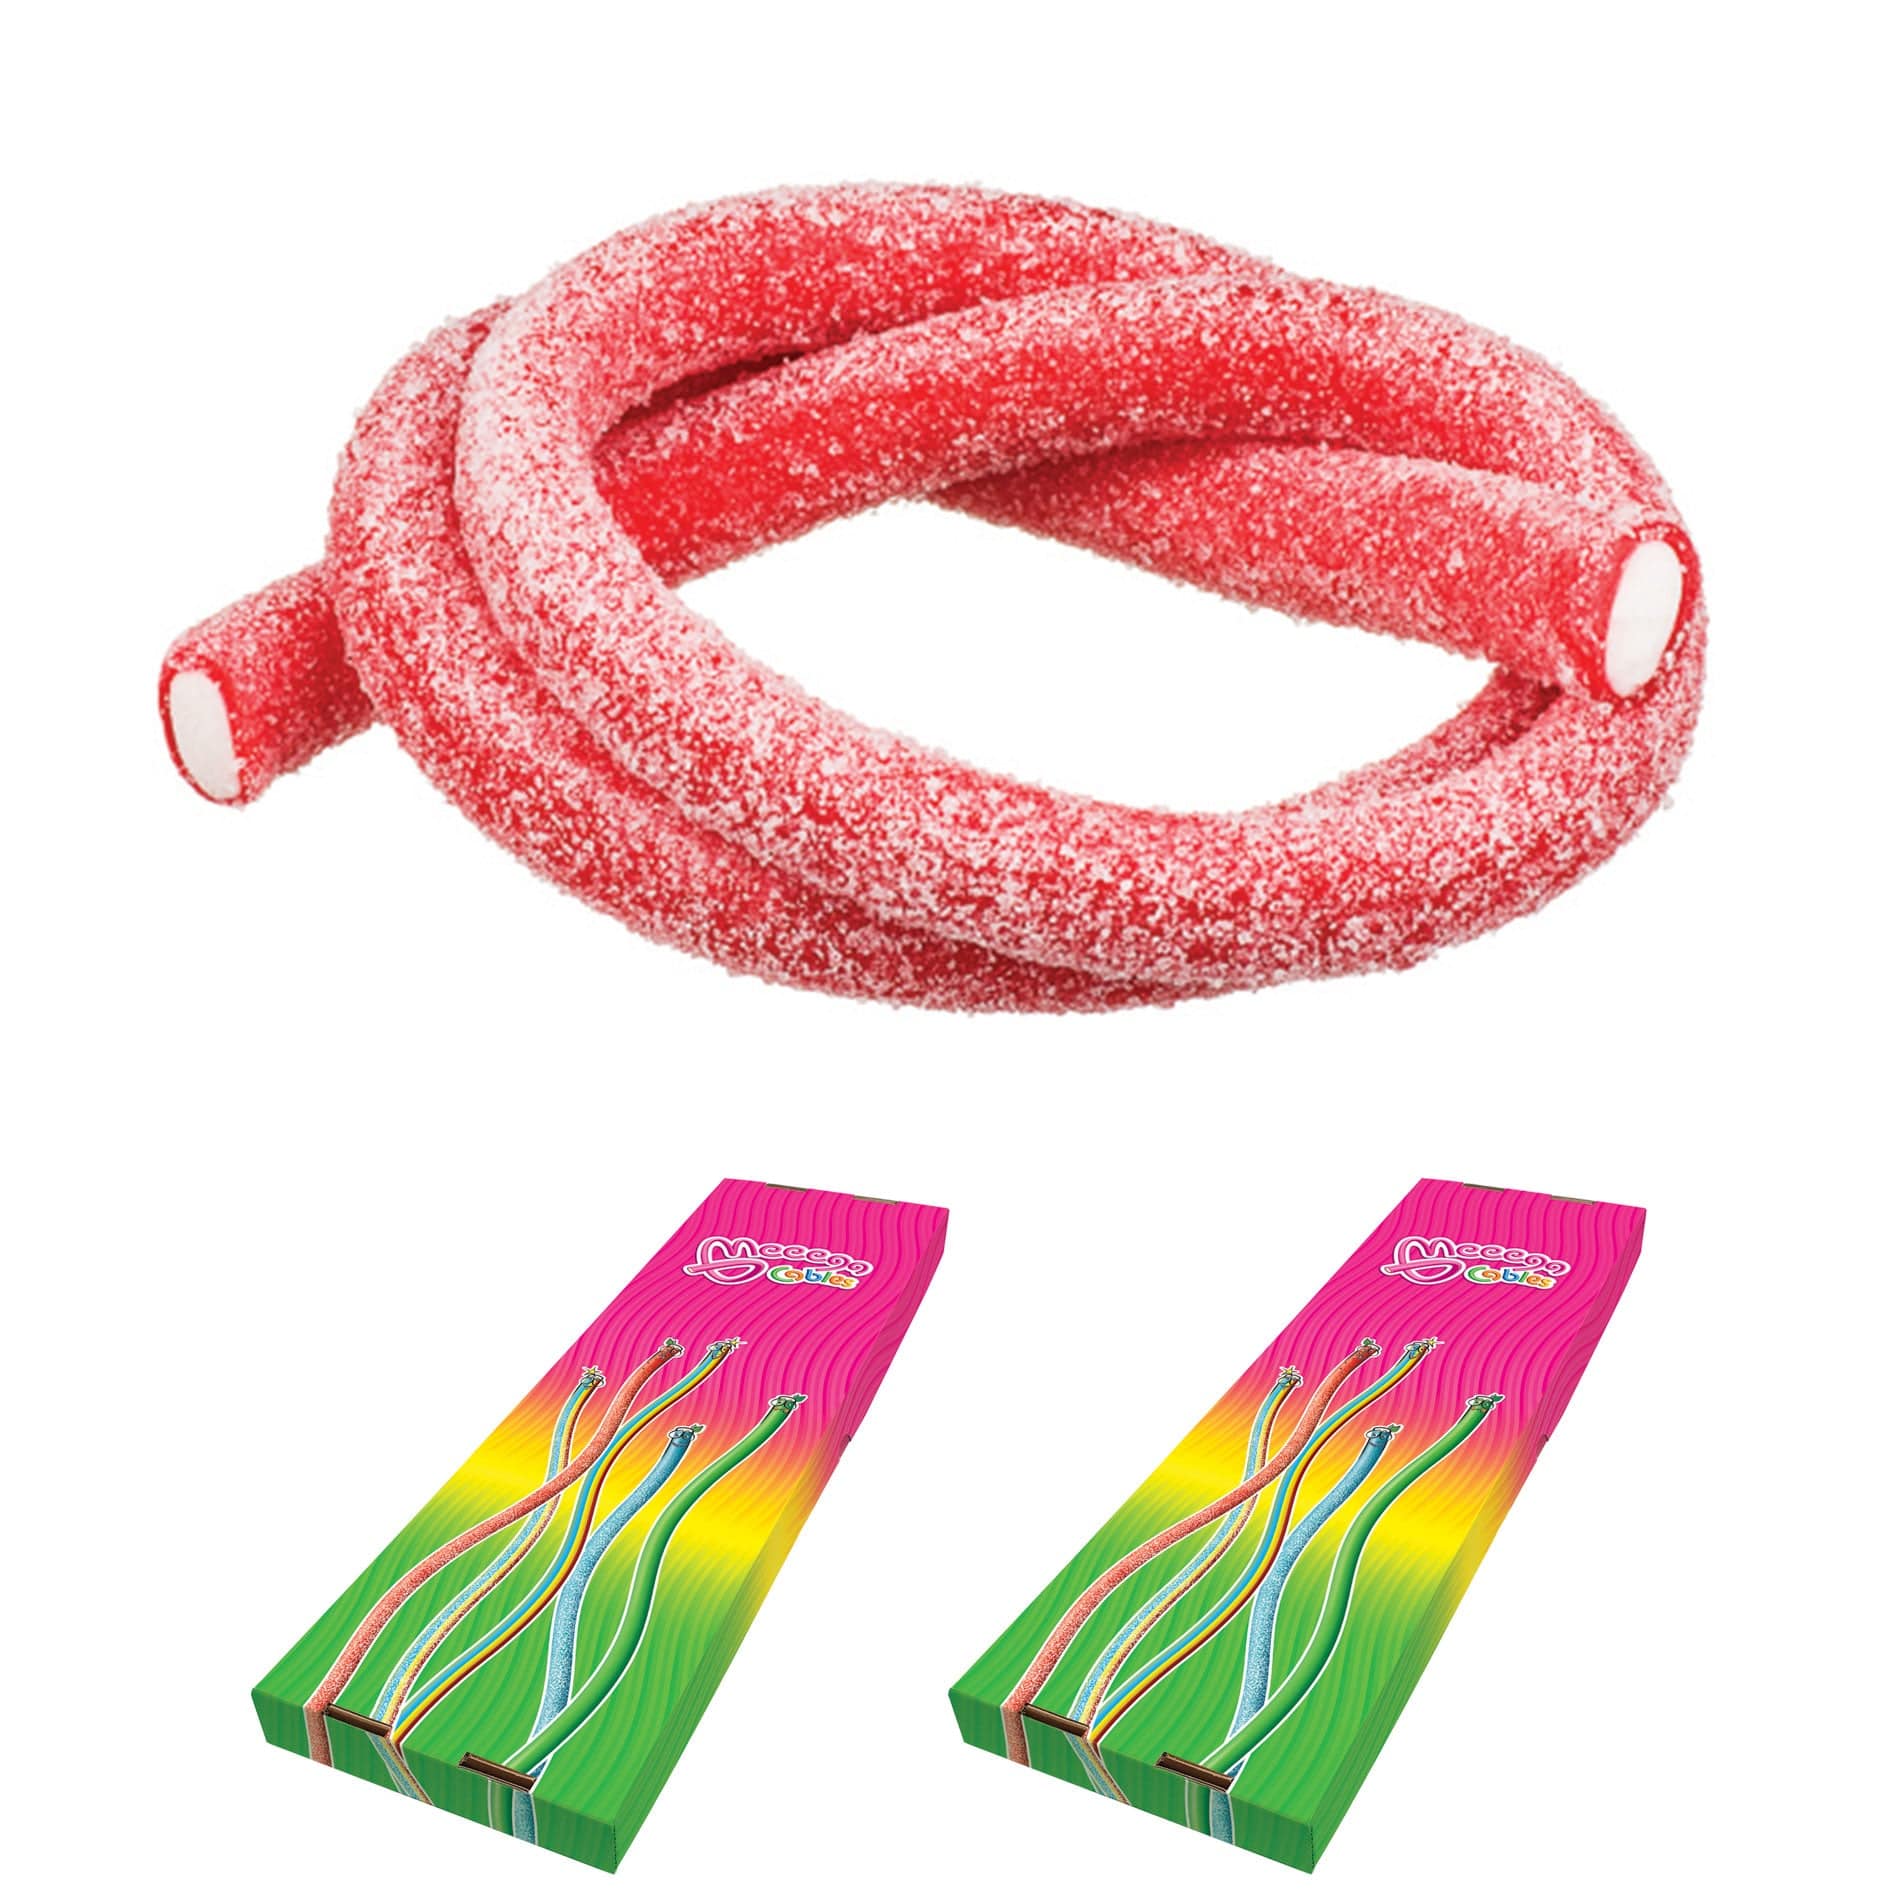 Novelty Concessions Gummy Rope SOUR STRAWBERRY / 2 Pack (60 pieces) Meeega Cables European Chewy Rope Candy - Box of 30 individually wrapped Meeega Cables, each over 2-feet long cups with lids and straws